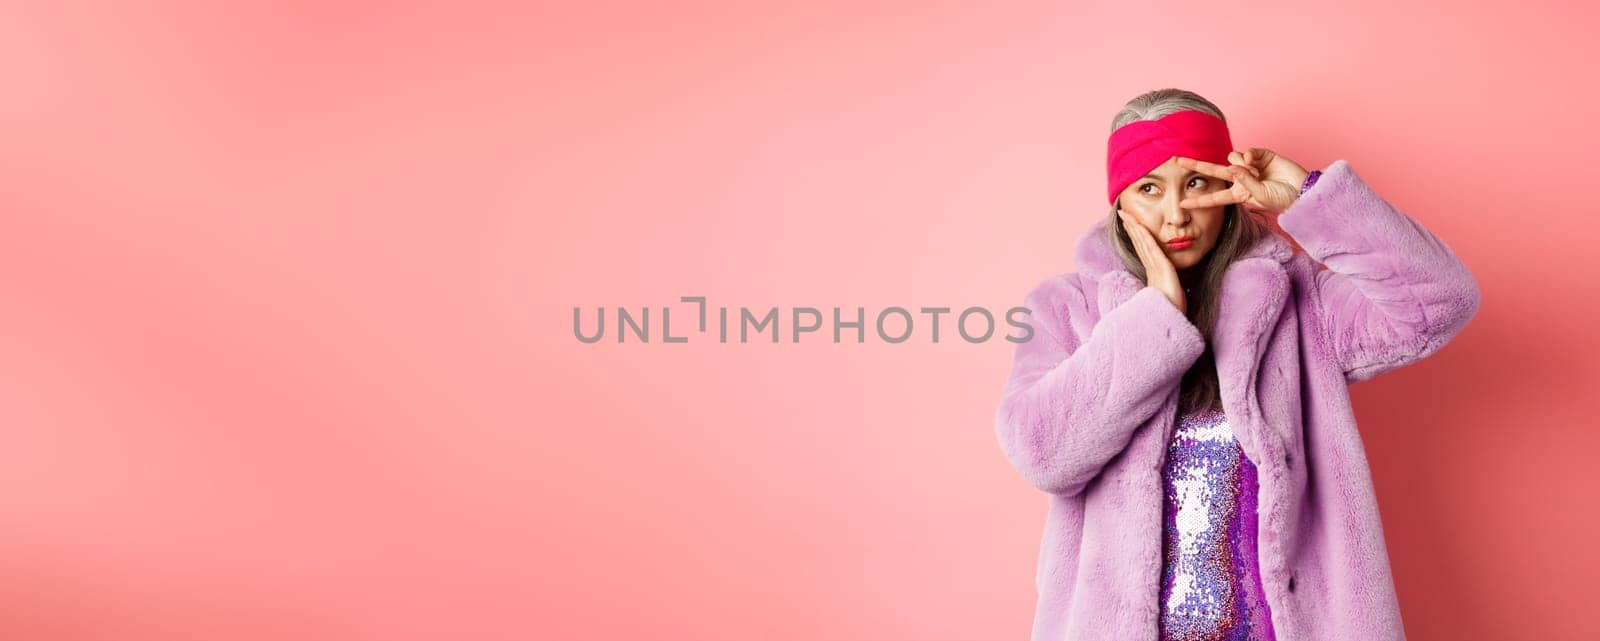 Fashion and shopping. Stylish and funky asian female model, showing peace signs and looking cute and silly, posing in purple faux fur coat over pink background.